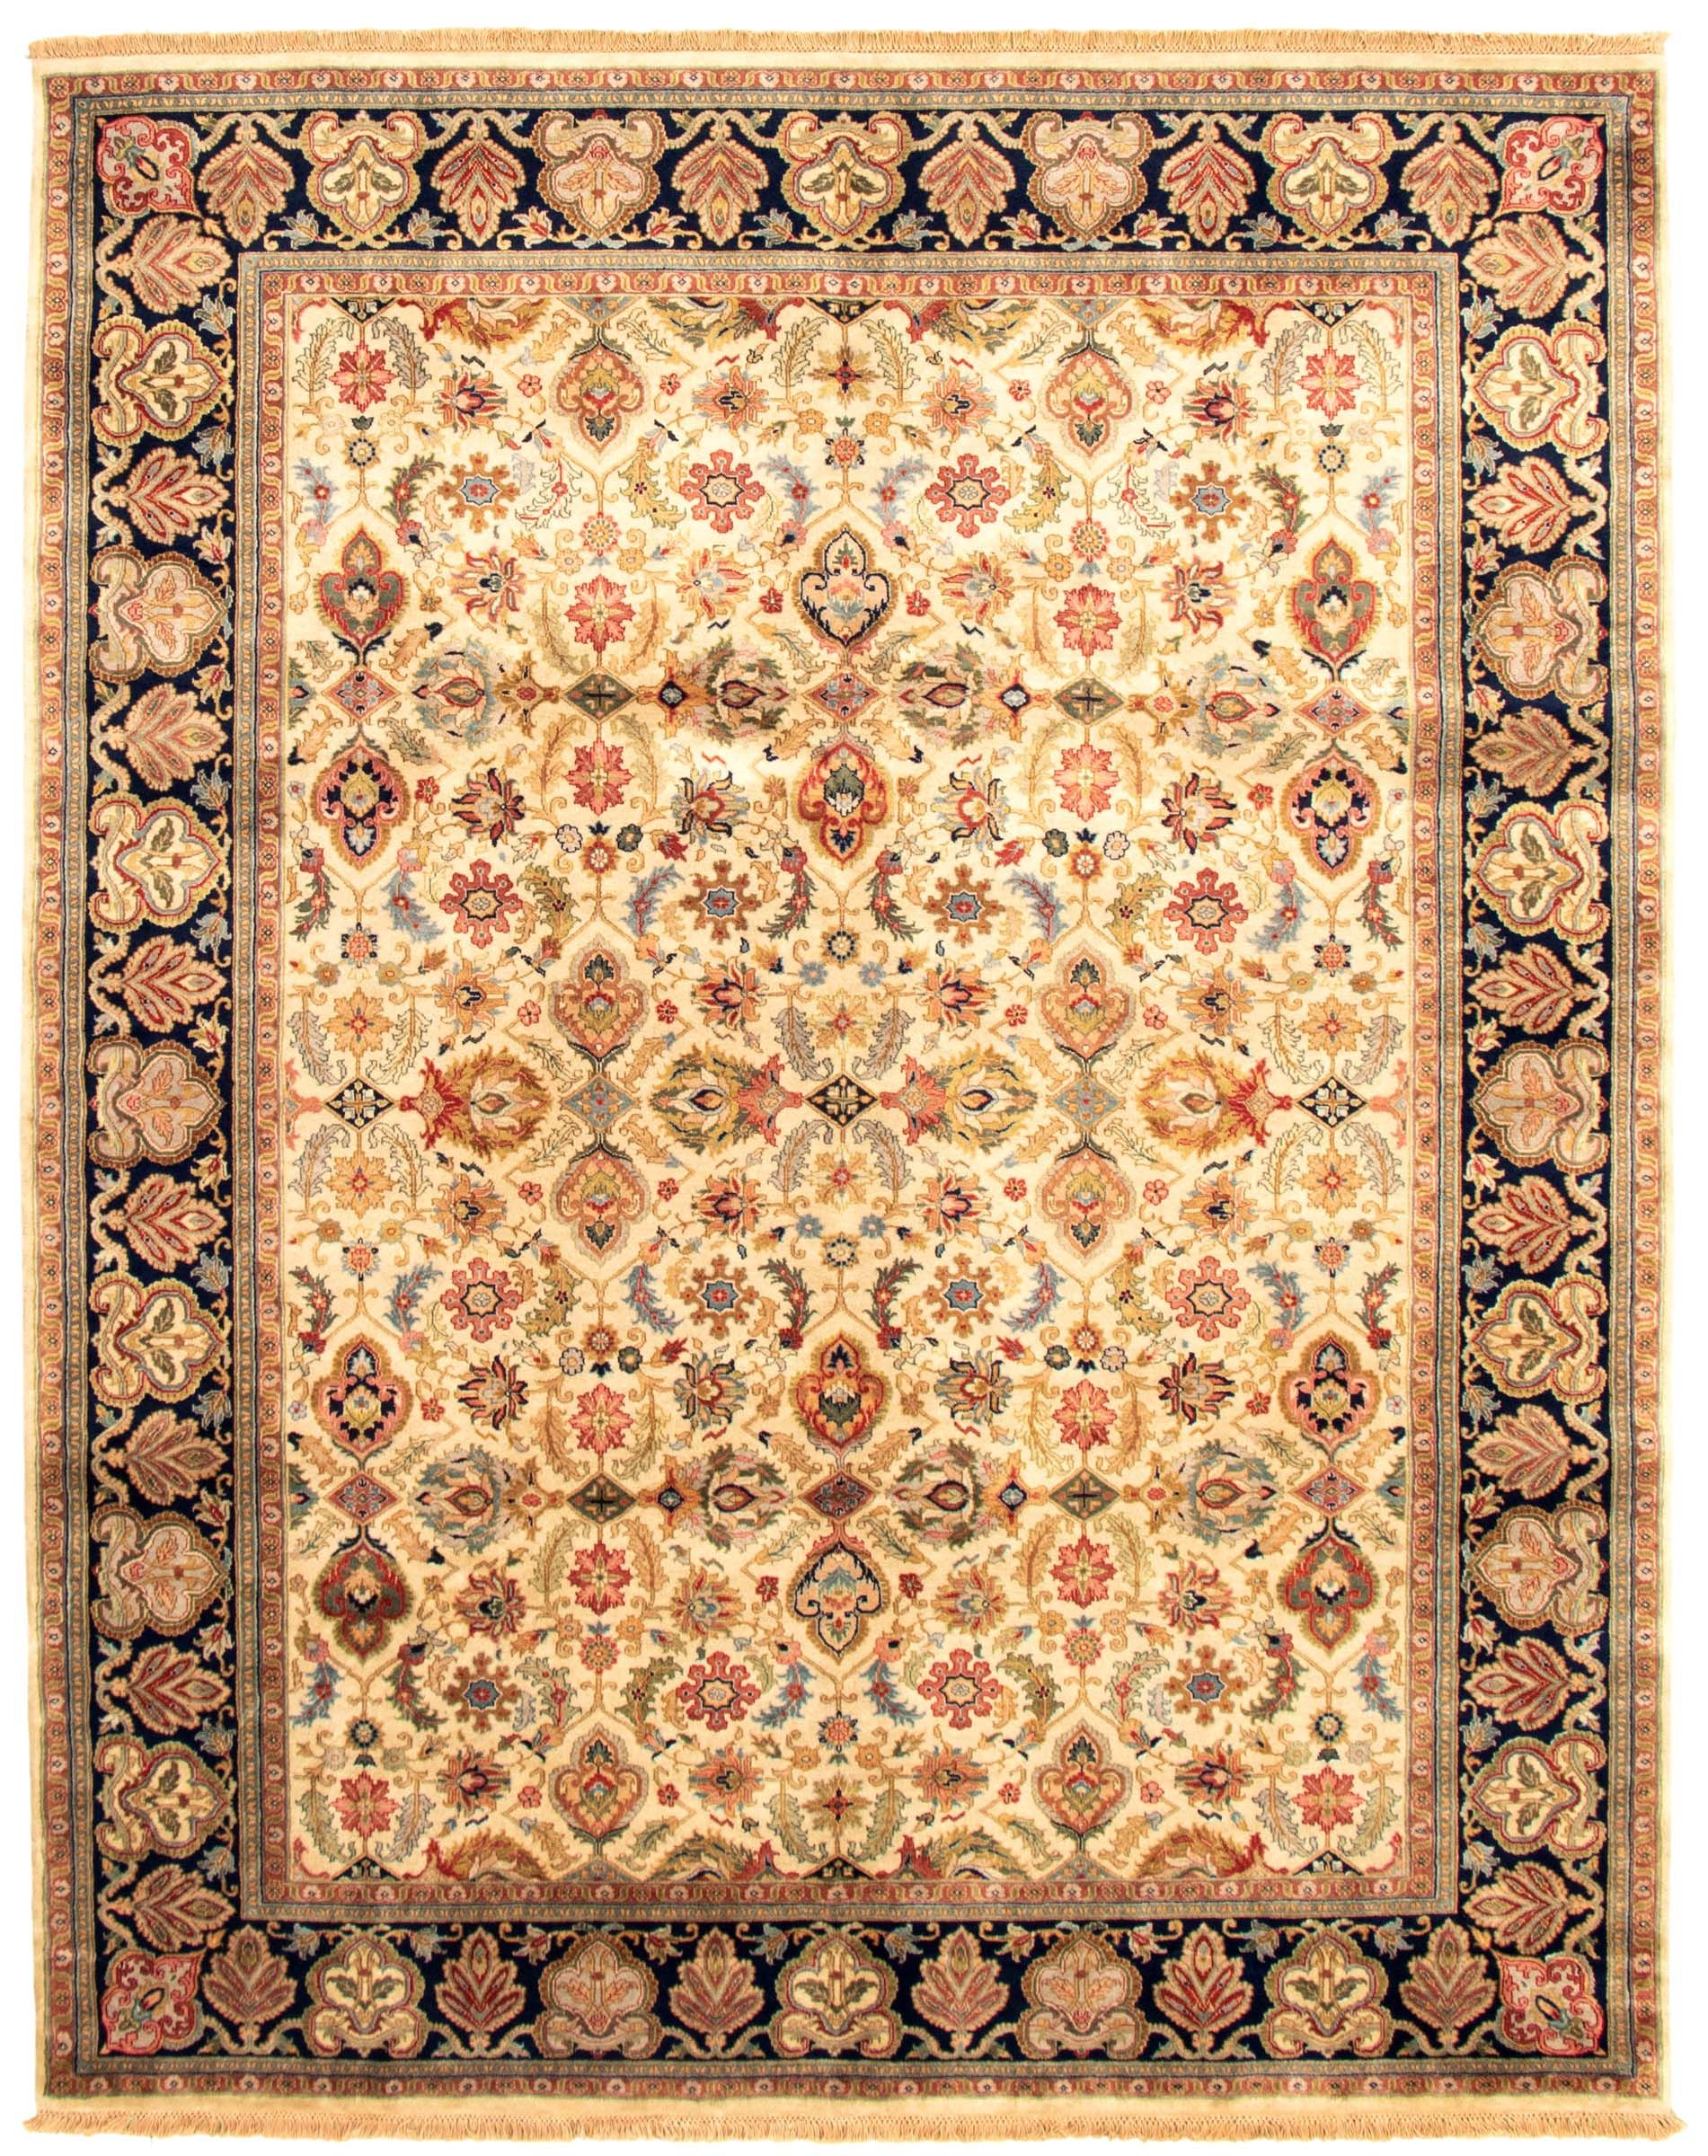 eCarpet Gallery Large Area Rug for Living Room Hand-Knotted Wool Rug 362671 Bedroom Tangier Moroccan Ivory Rug 8'0 x 10'0 